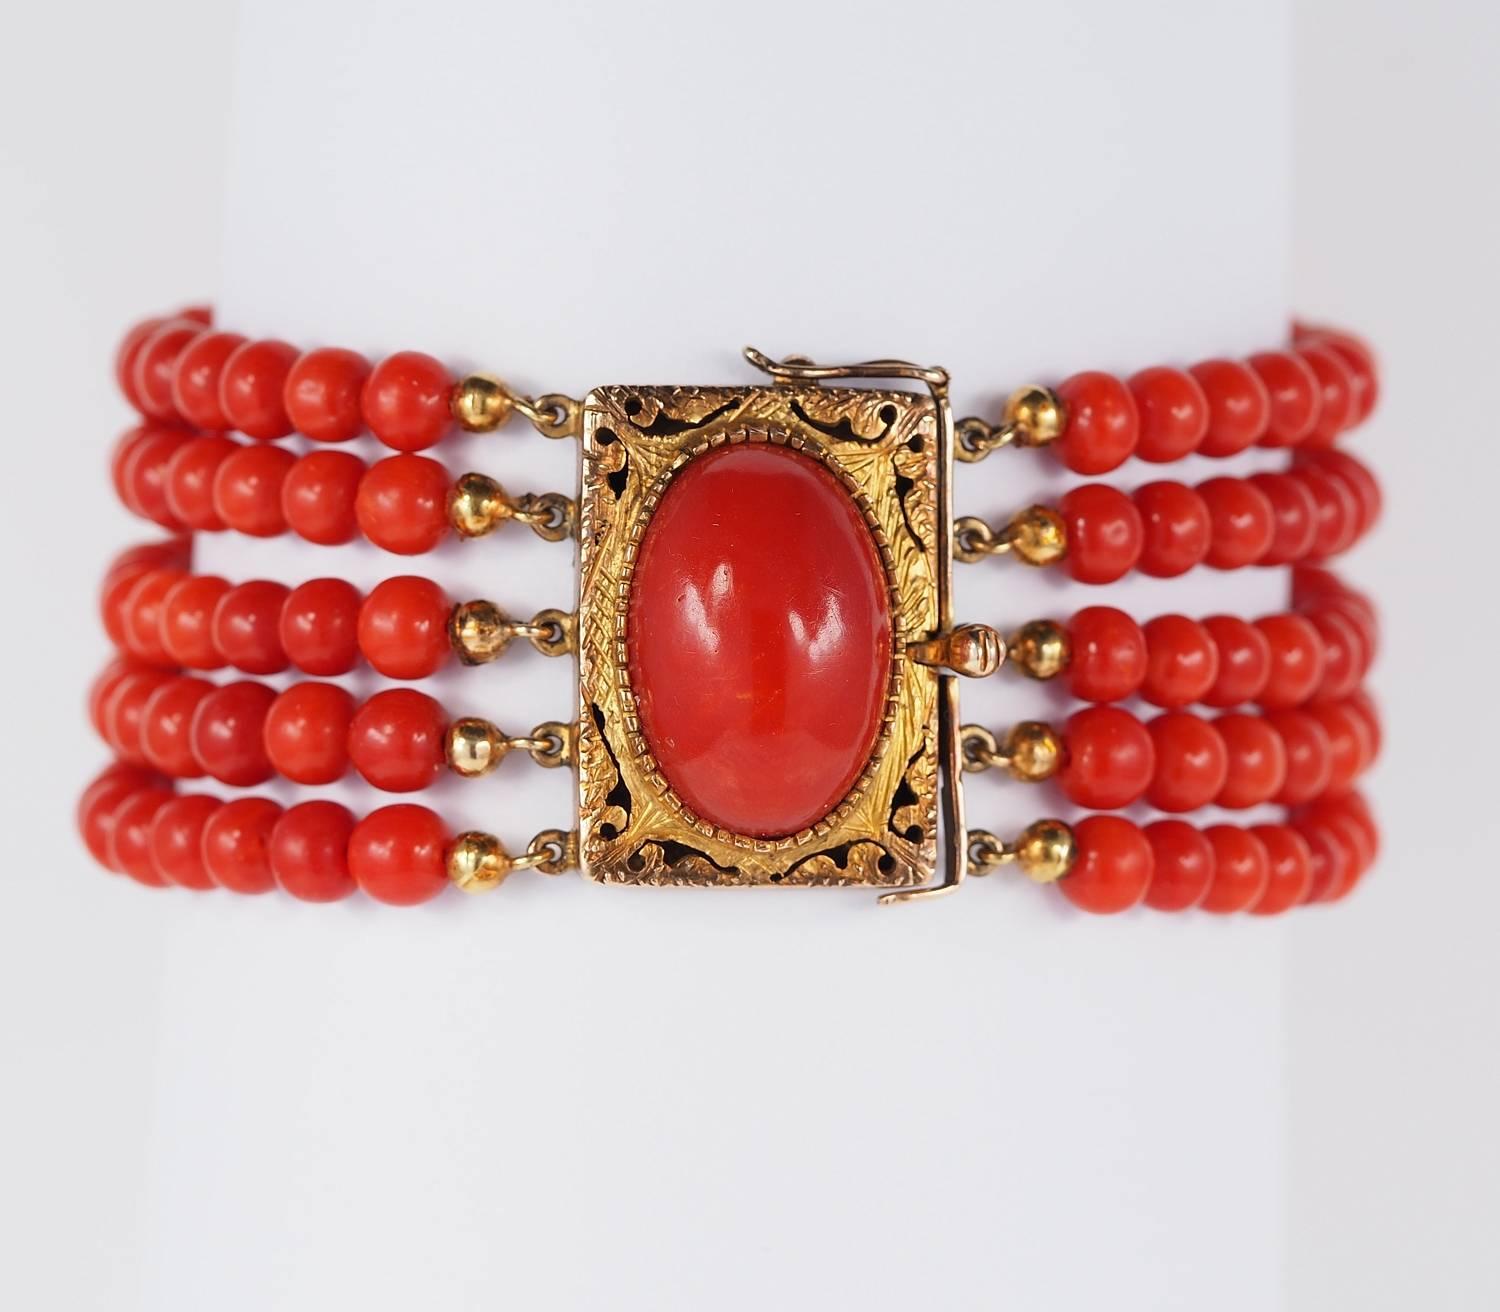 Beautiful authentic Victorian (1870 ca) bracelet. Italian origin.
Set with rare variety of deep Red natural Coral, untreated OX Blood colour.
With a sensational centre piece of large Coral cabochon mounted in 14 KT solid gold, marked.
Fine detailed,